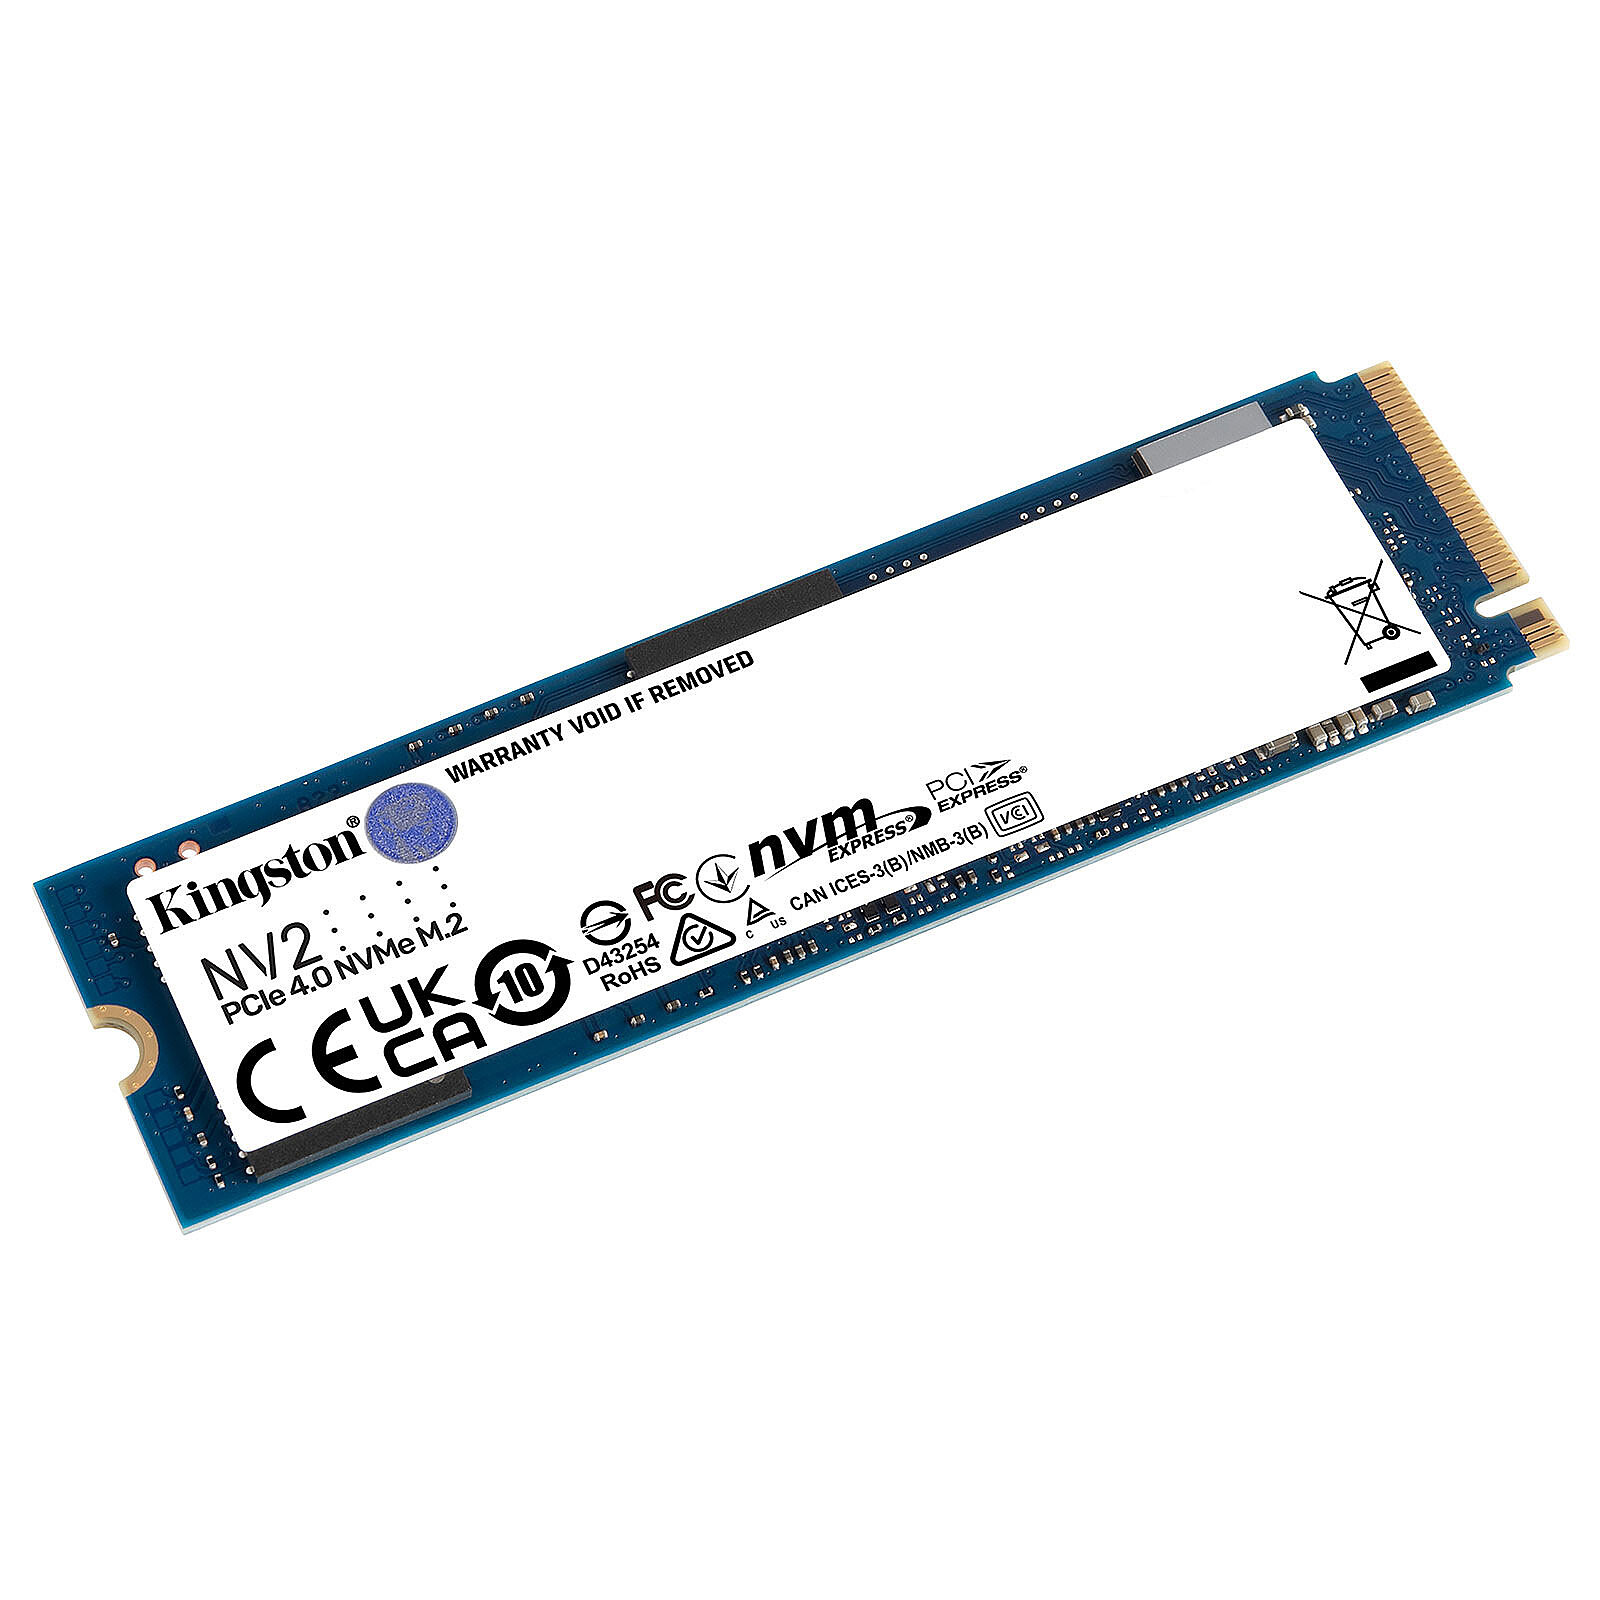 Samsung SSD 870 QVO 4 To - Disque SSD - LDLC